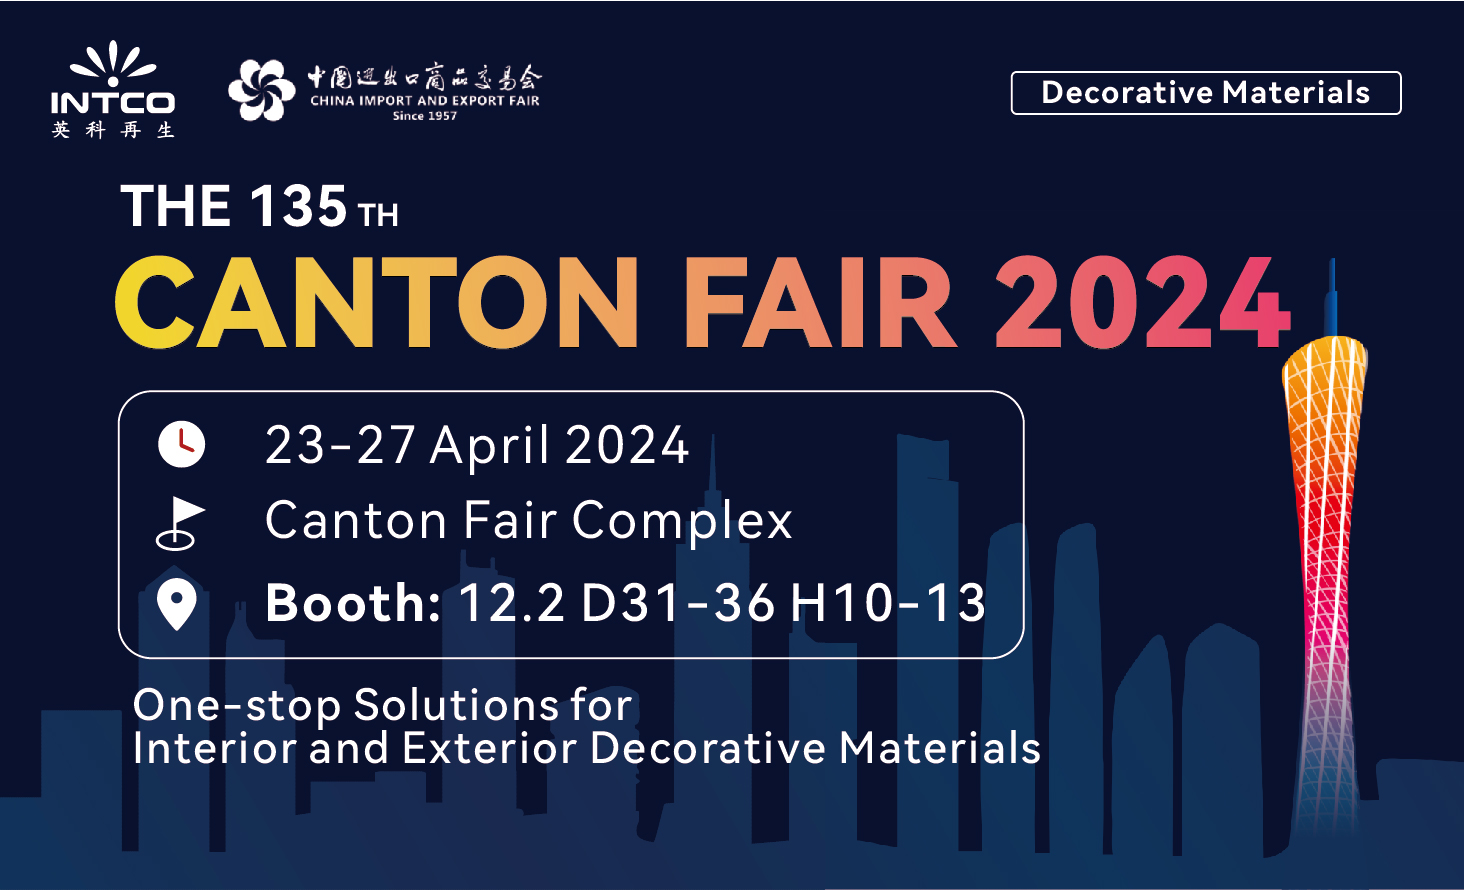 Canton Fair：Intco Decor welcomes you to visit our booth: 12.2 D31-36; E10-13